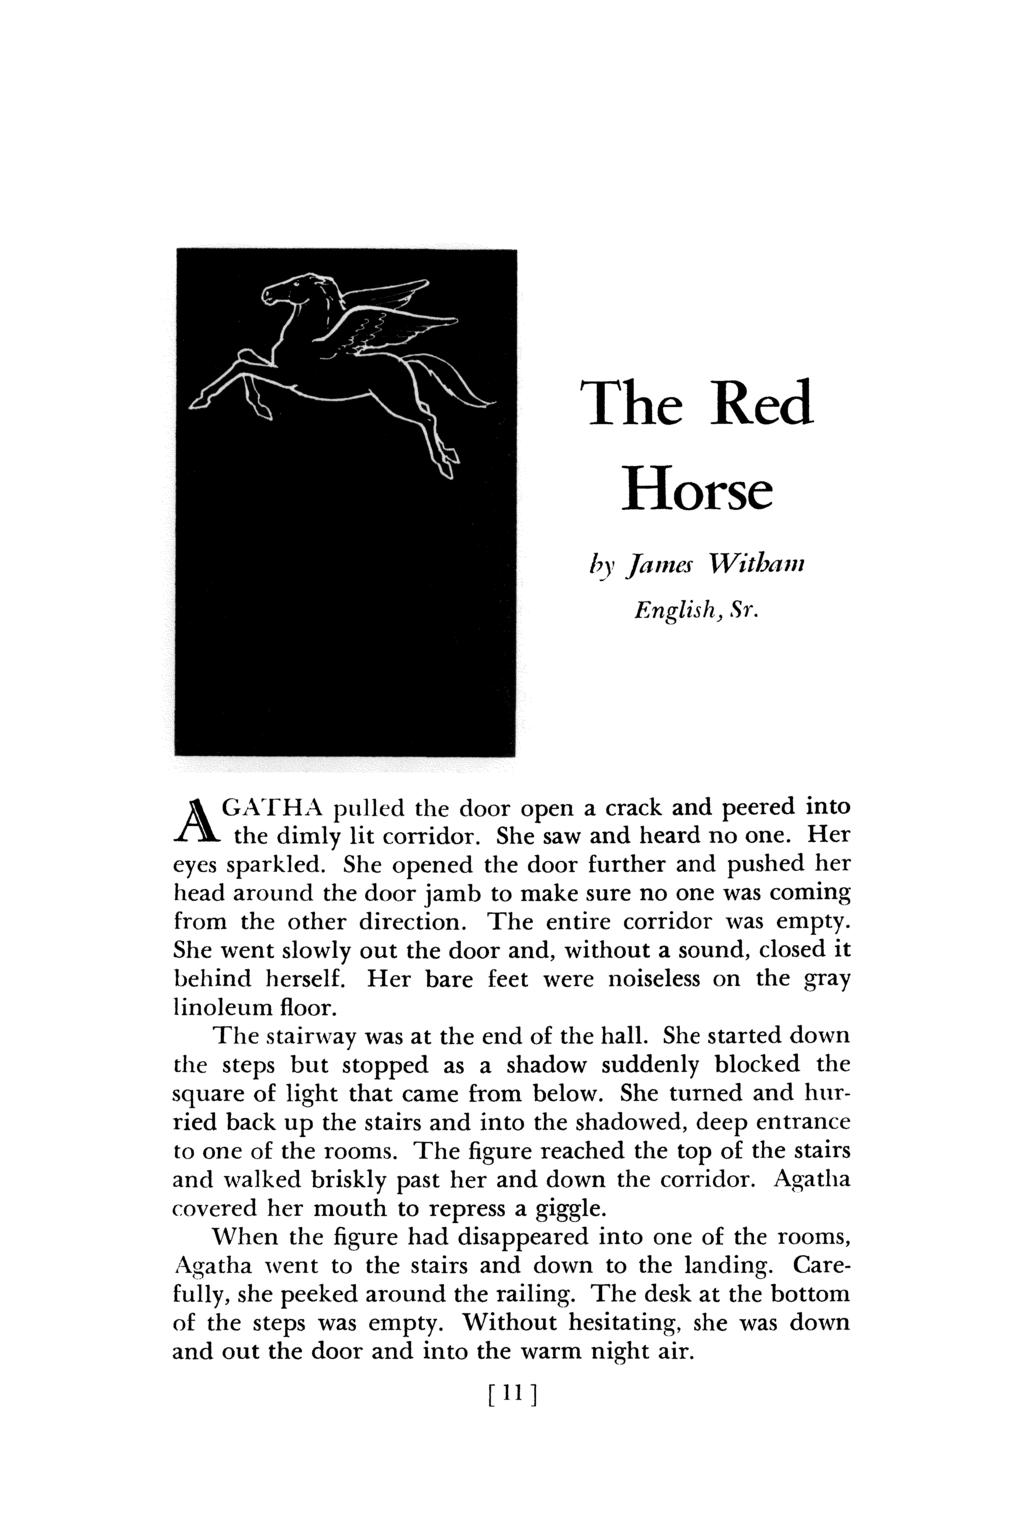 The Red Horse by James English, Sr. Witbam AGATHA pulled the door open a crack and peered into the dimly lit corridor. She saw and heard no one. Her eyes sparkled.